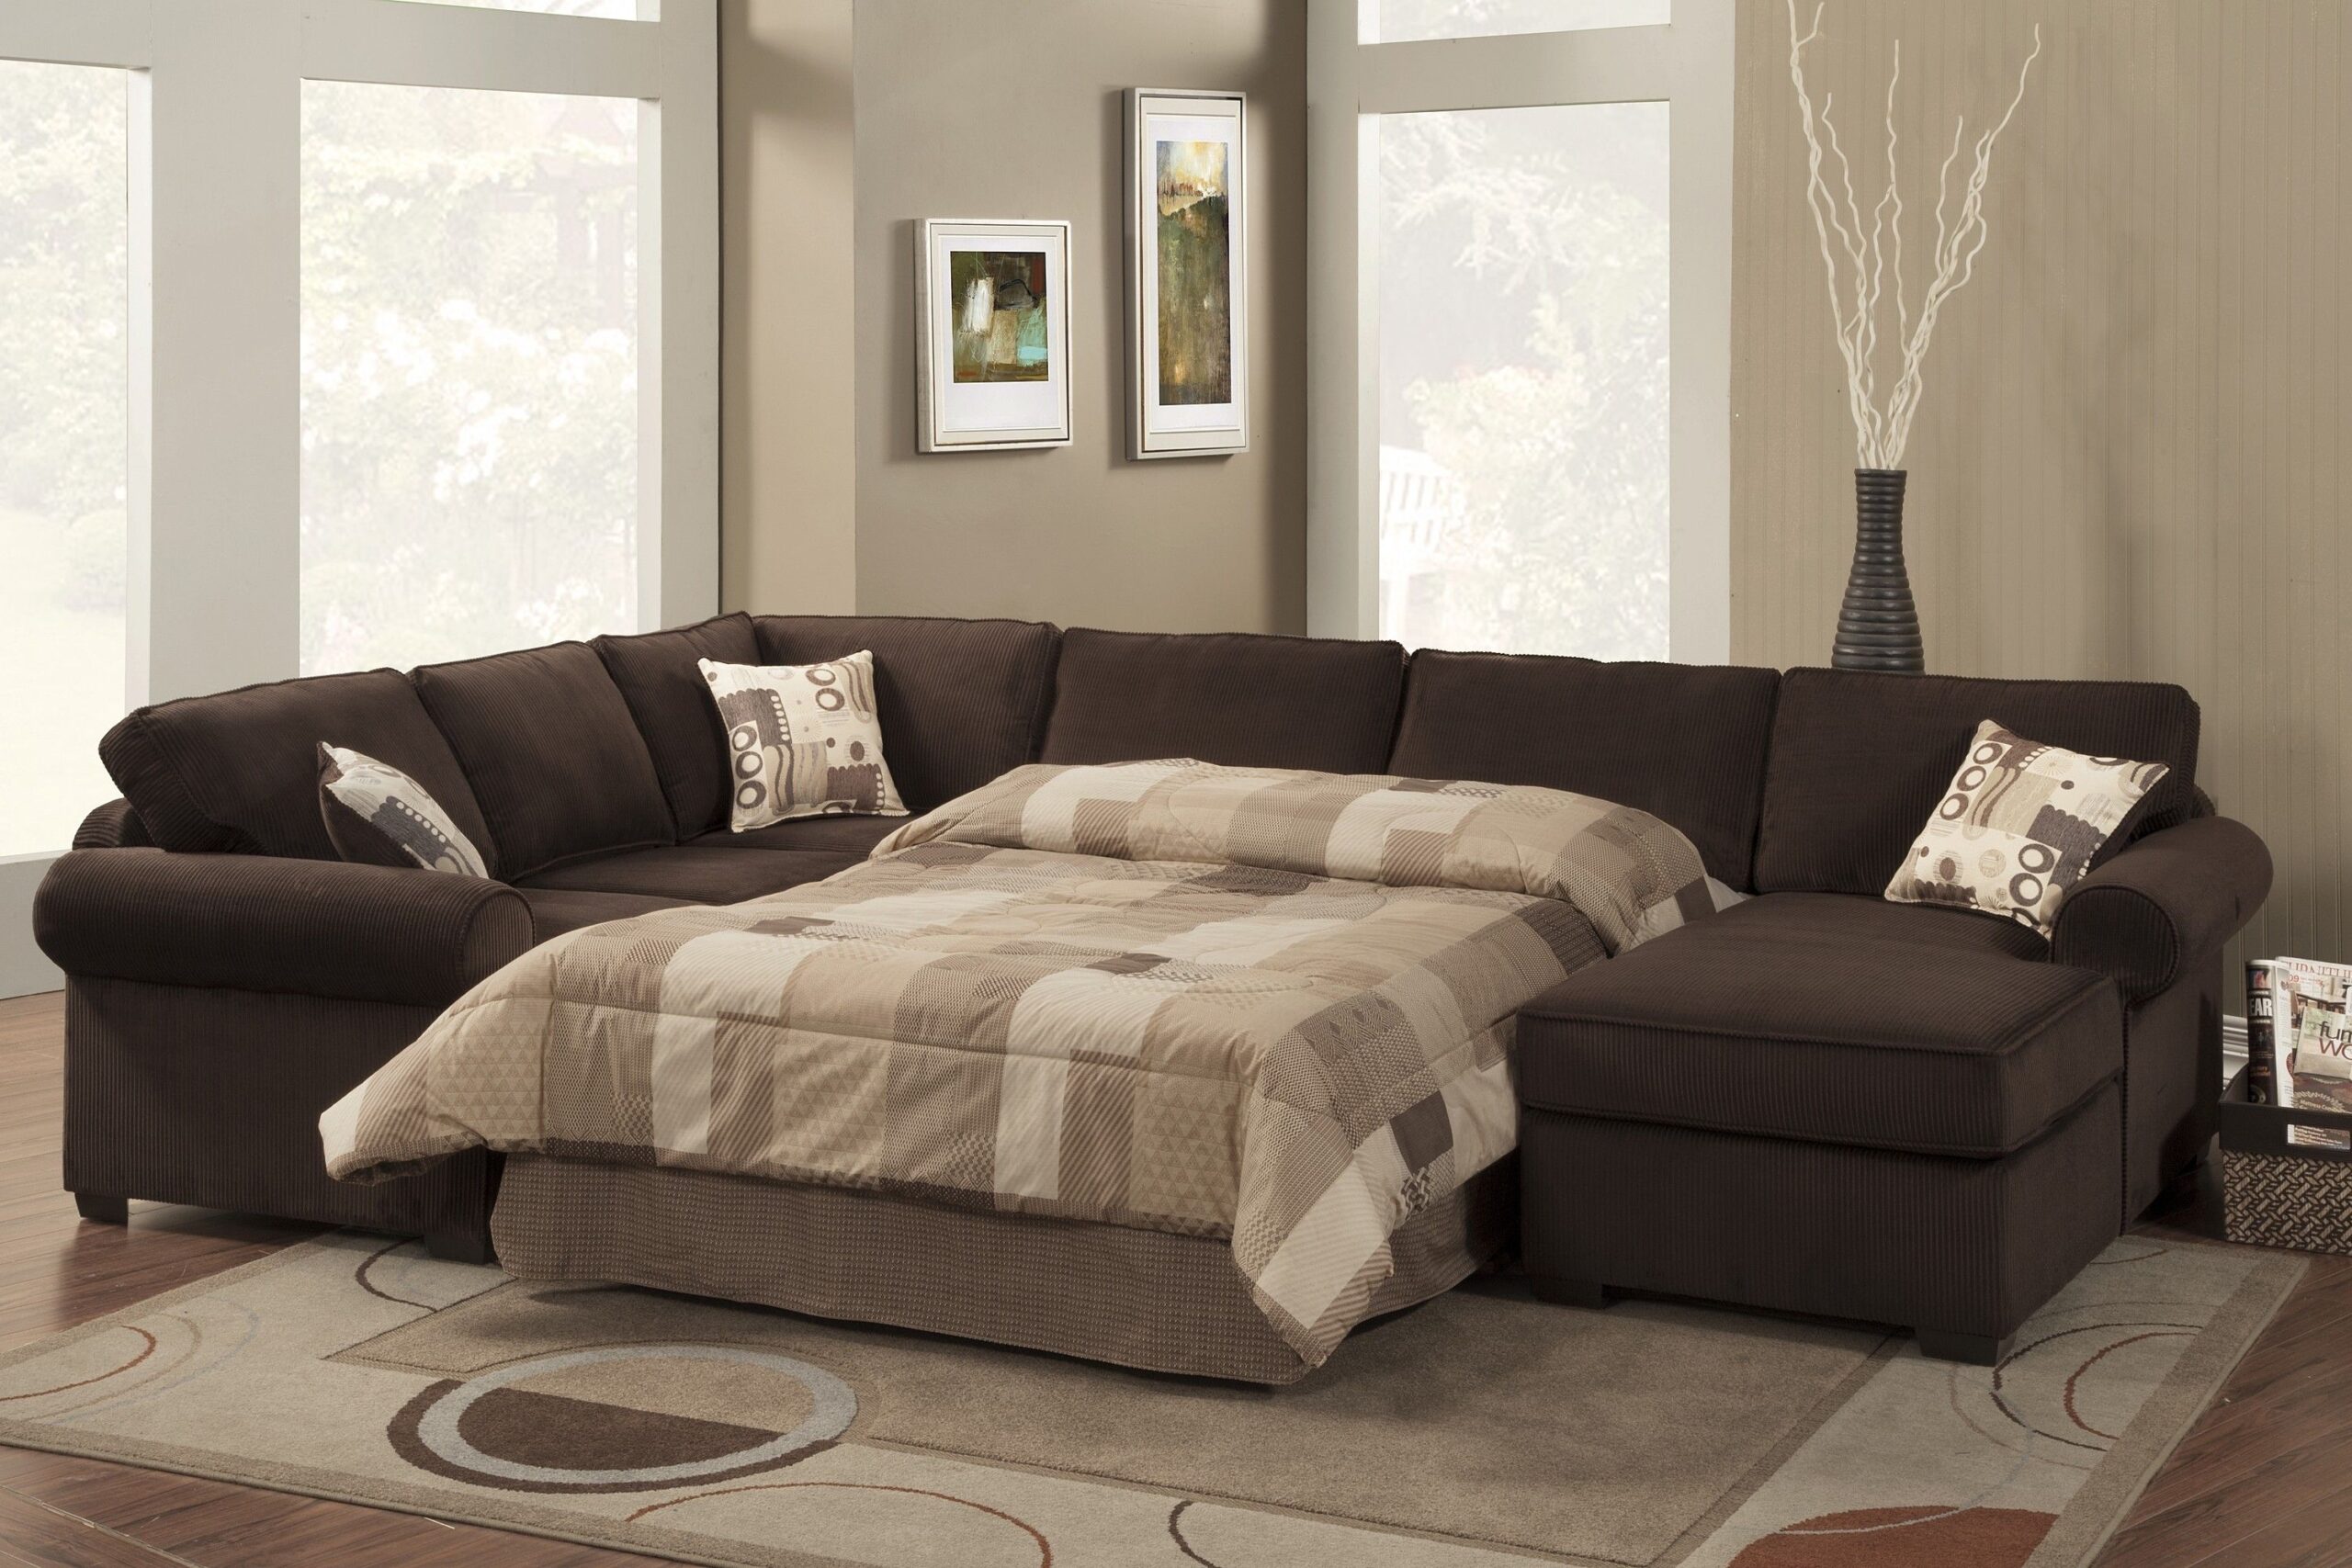 Tips for Choosing the Best Sectional Sleepers